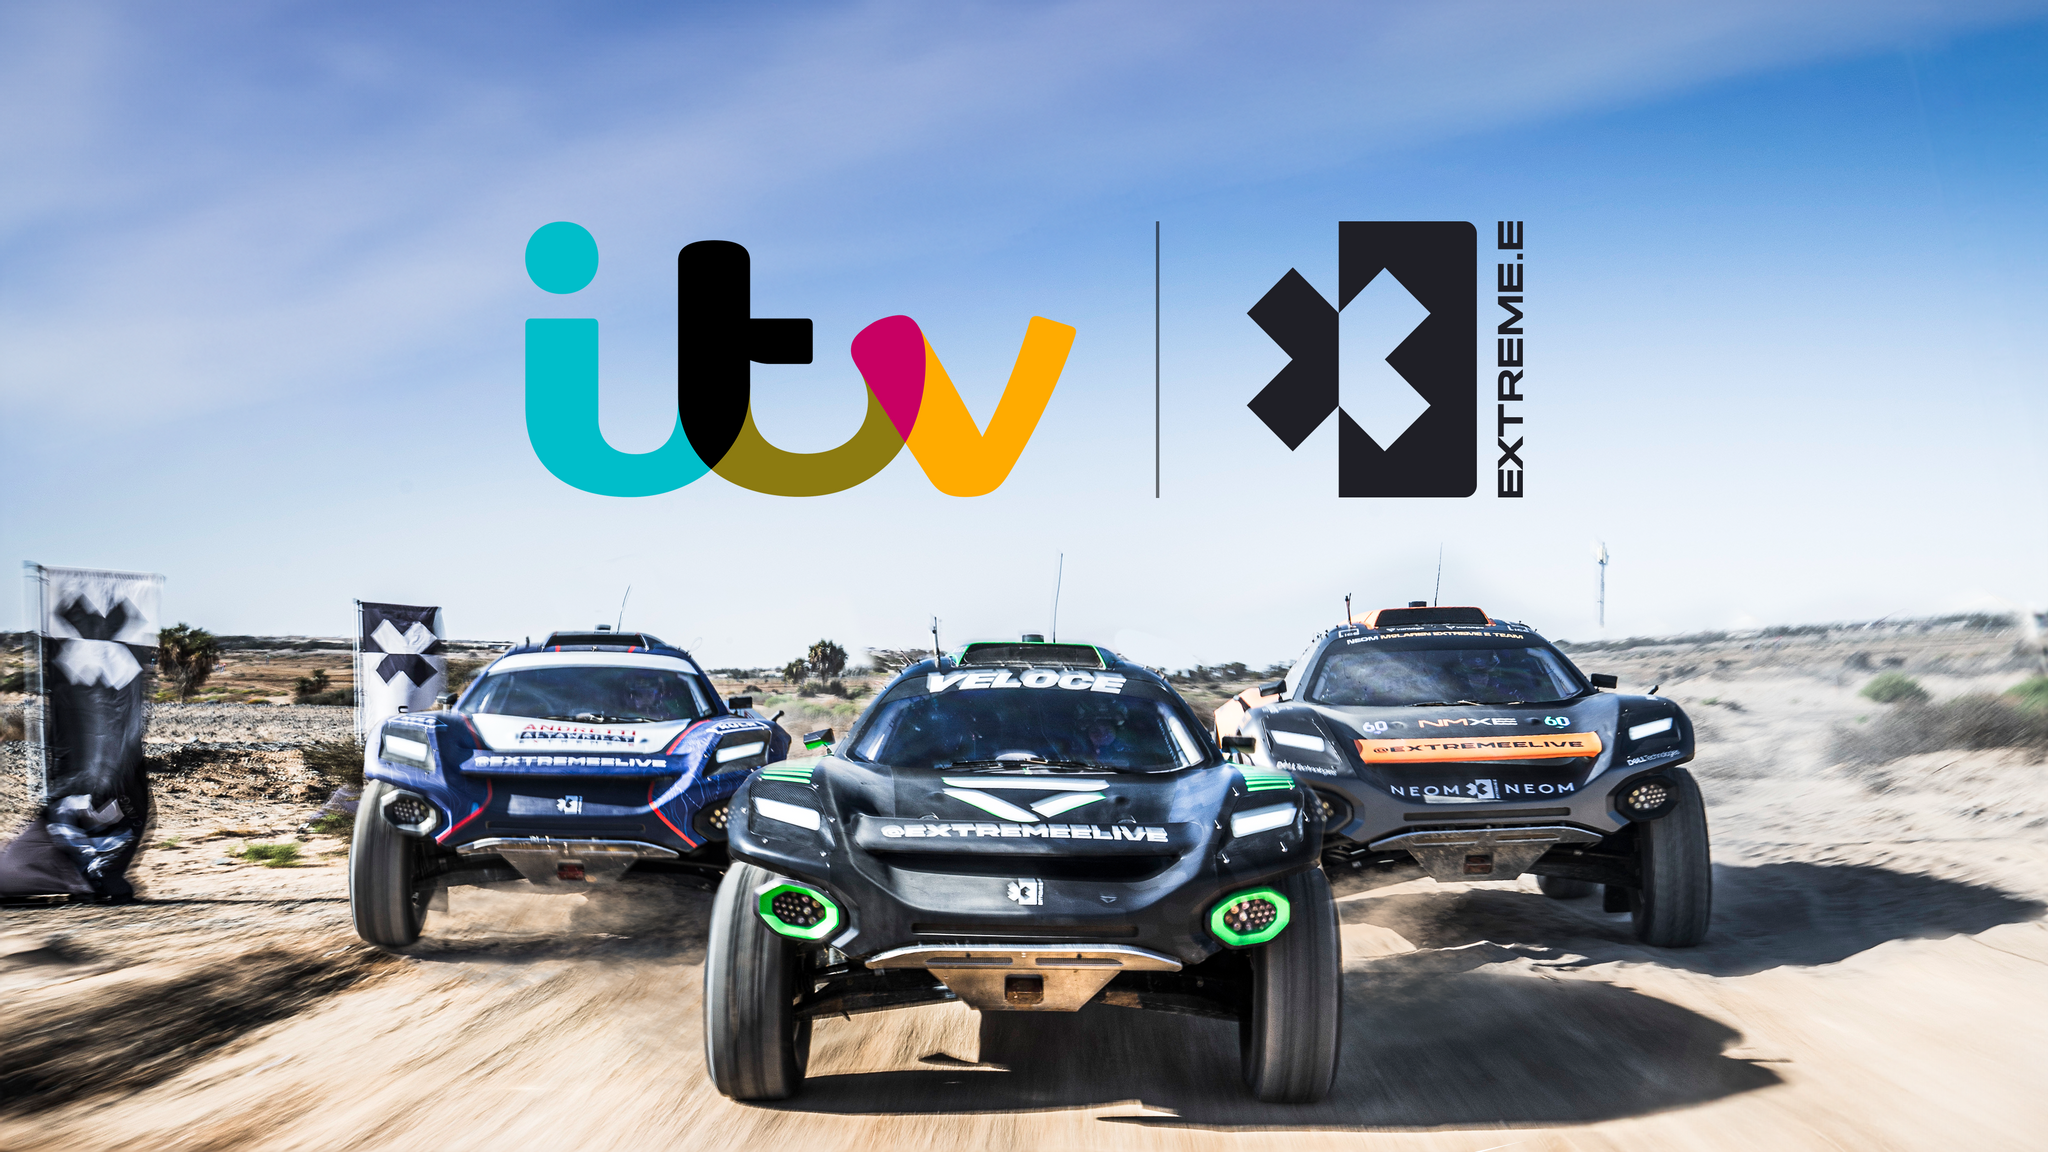 Extreme E extends broadcast partnership with ITV in the UK - News - Extreme E